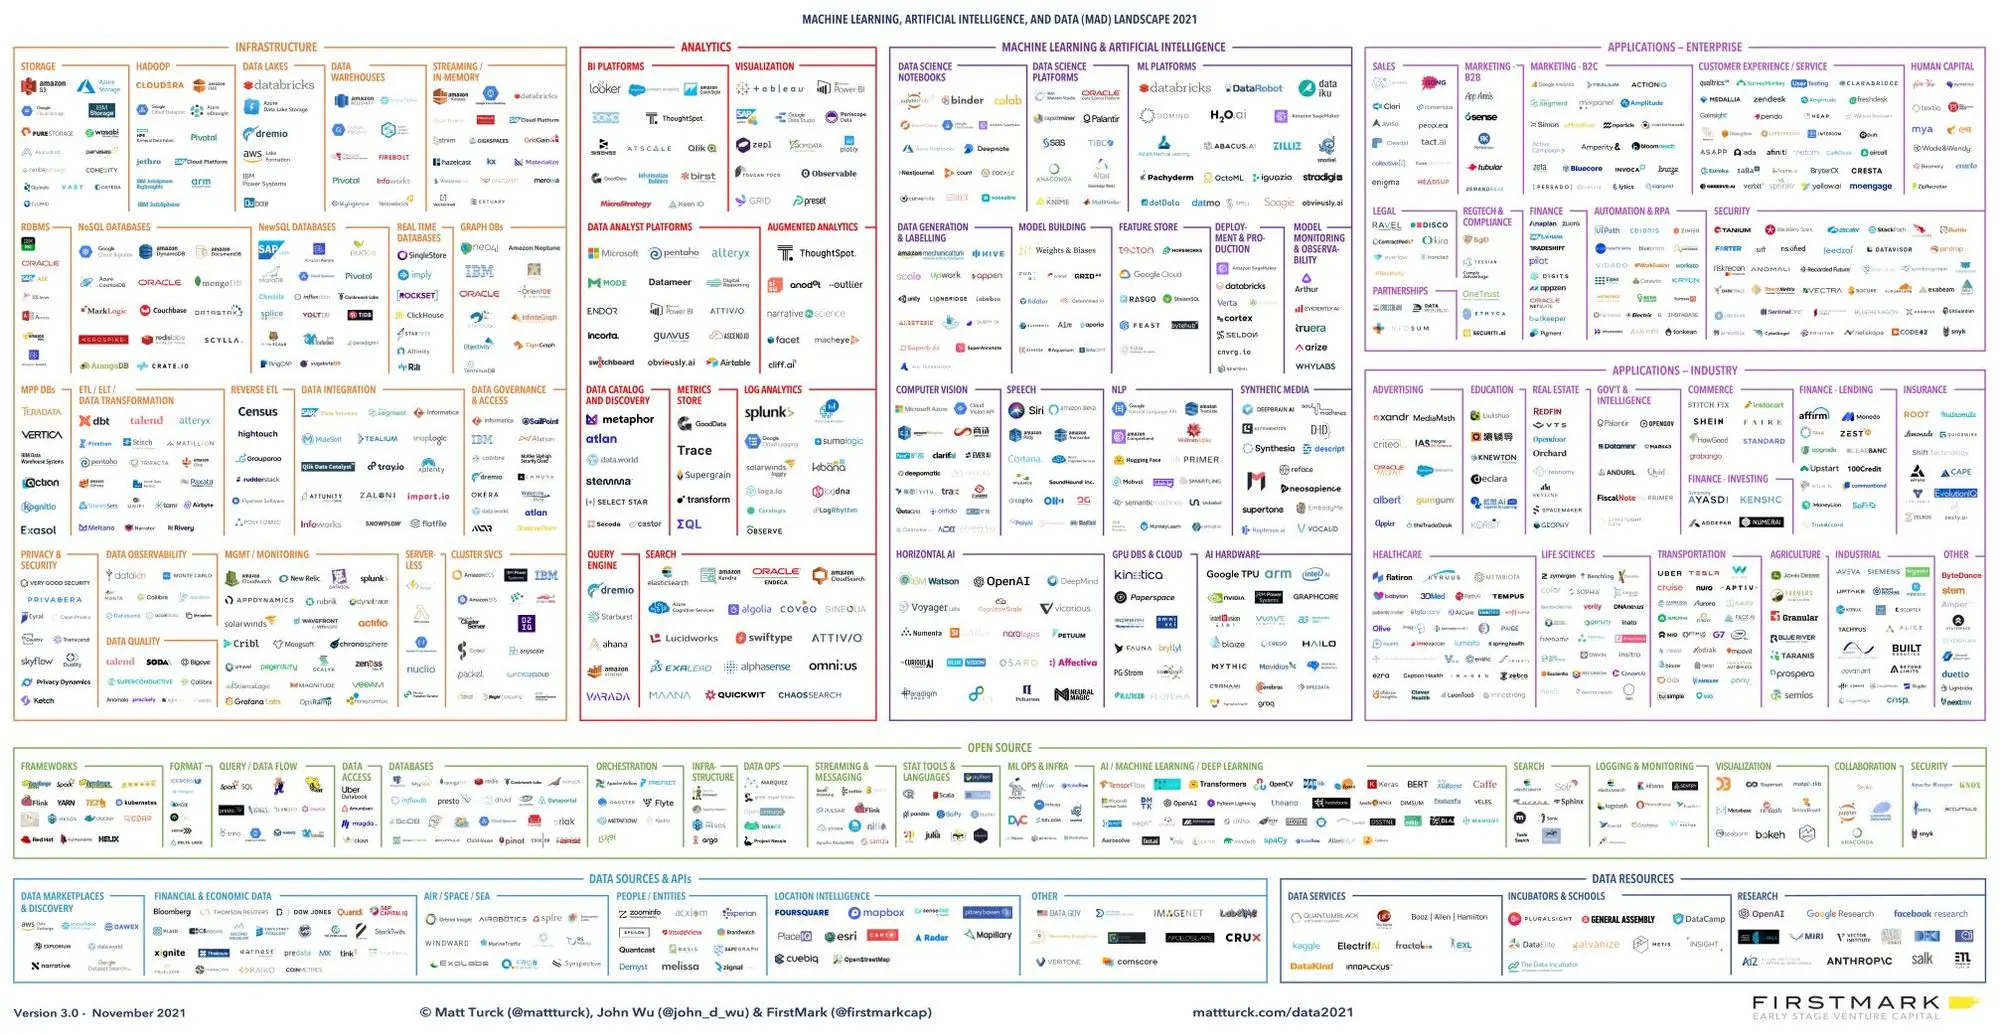 The Machine learning, Artificial intelligence and Data (MAD) landscape by Matt Turck and John Wu